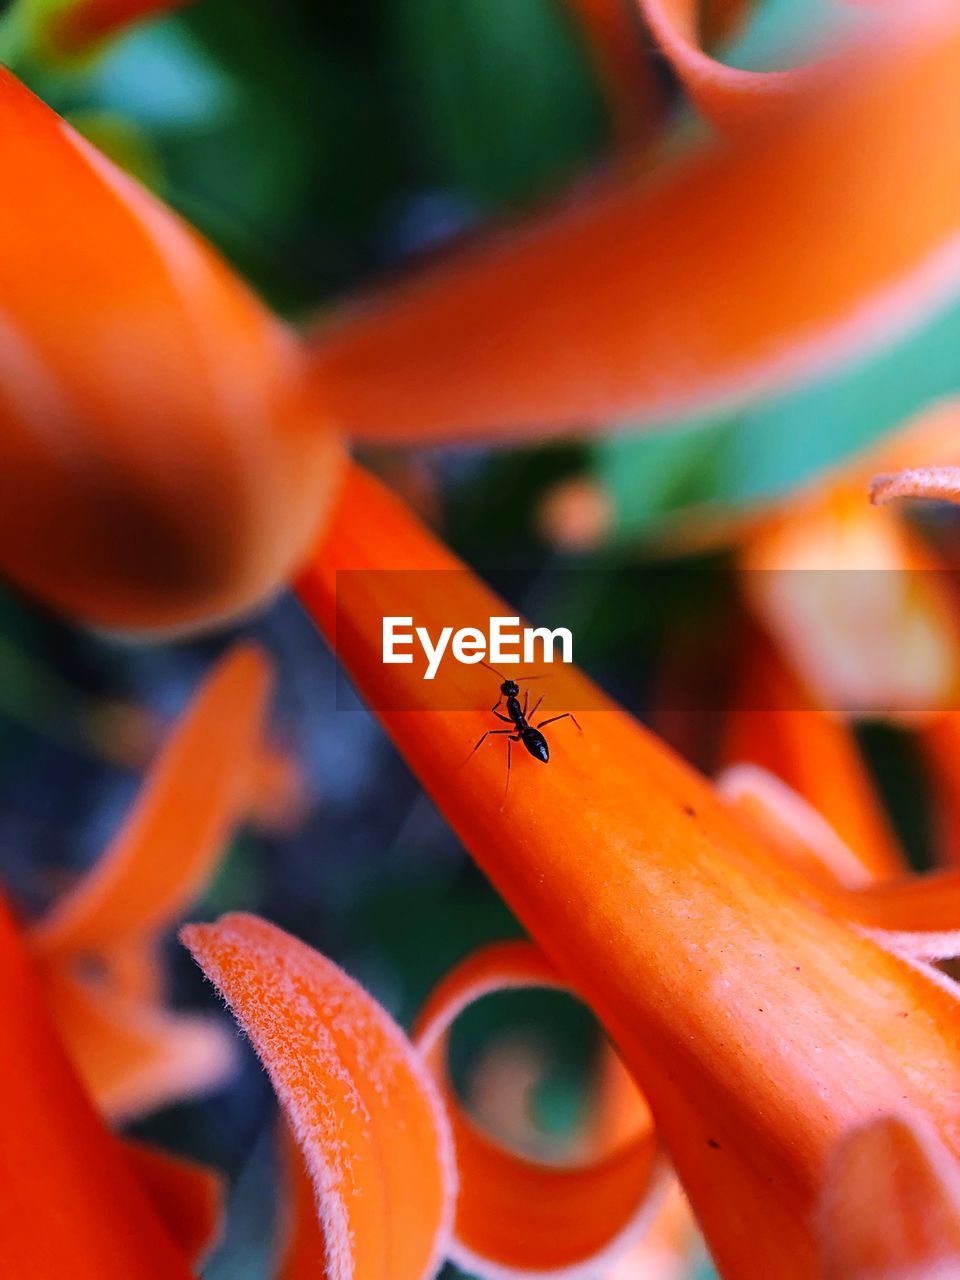 CLOSE-UP OF ORANGE INSECT ON FLOWER